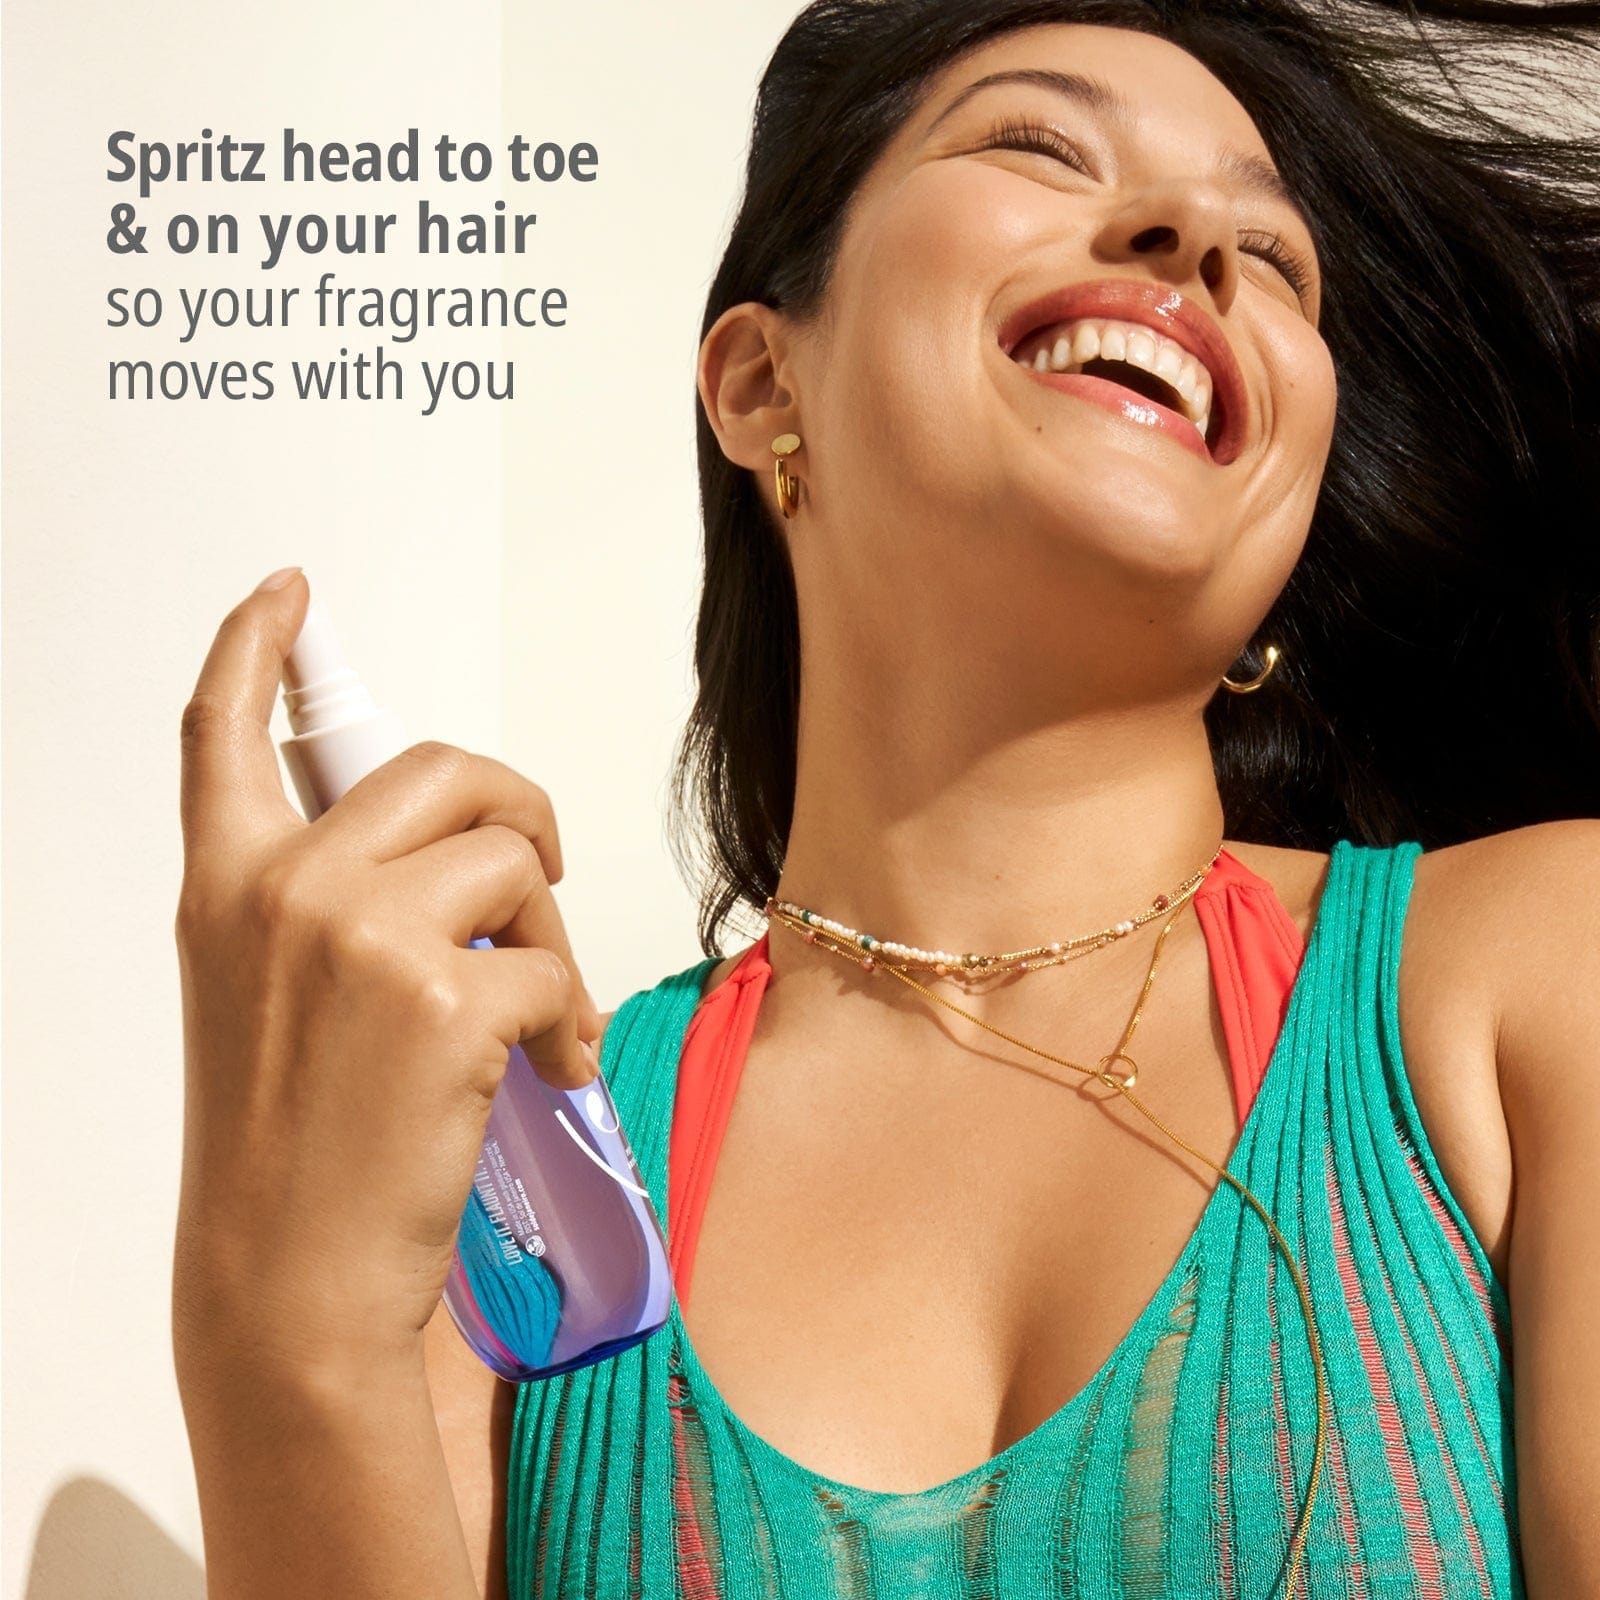 Spirtz head to toe &amp; on your hair so your fragrance moves with you 